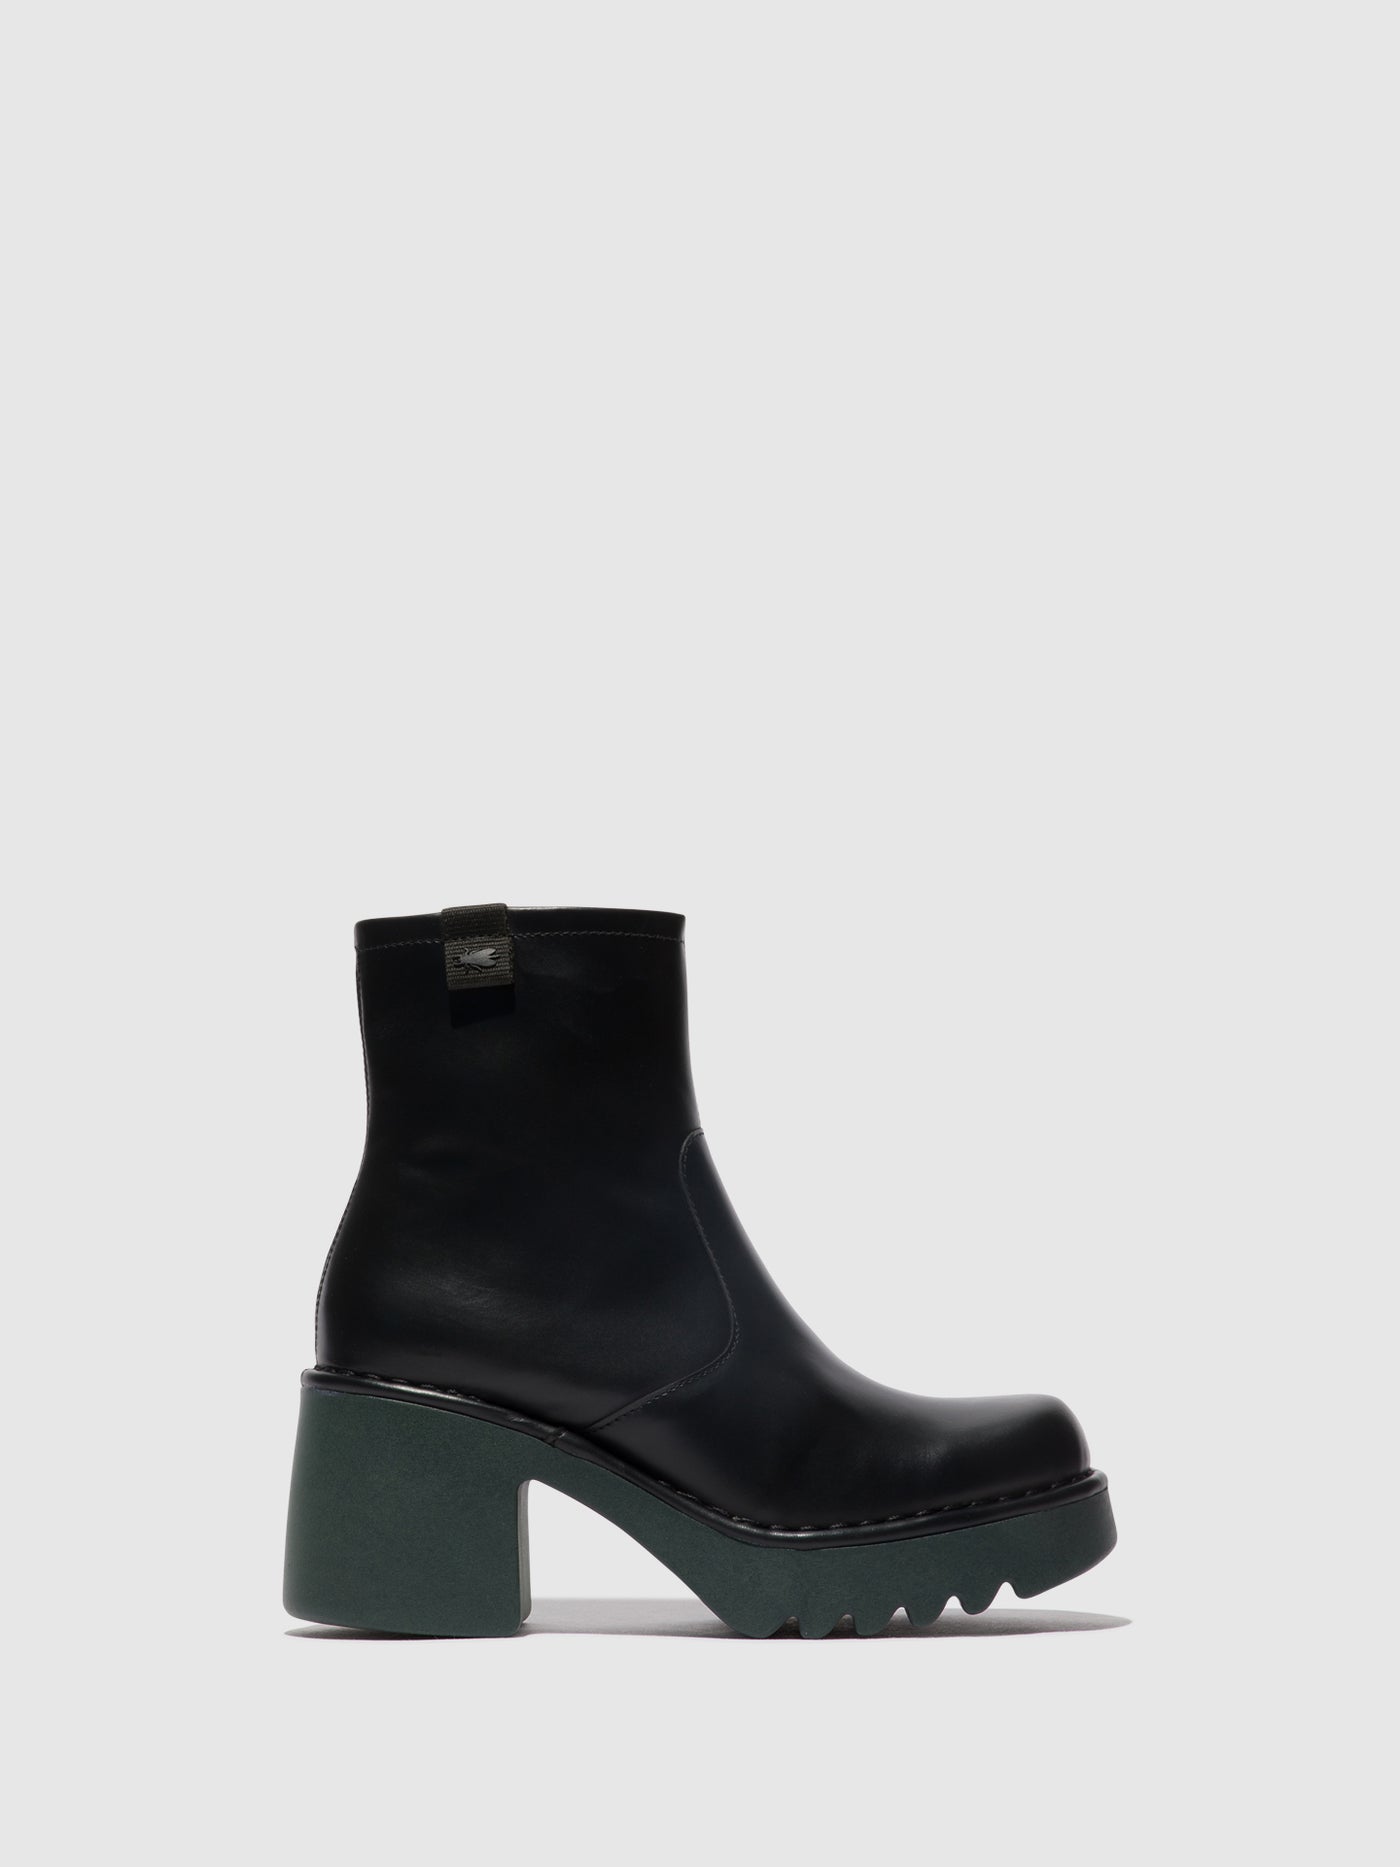 Zip Up Ankle Boots MOGE250FLY BLACK (TEAL SOLE)